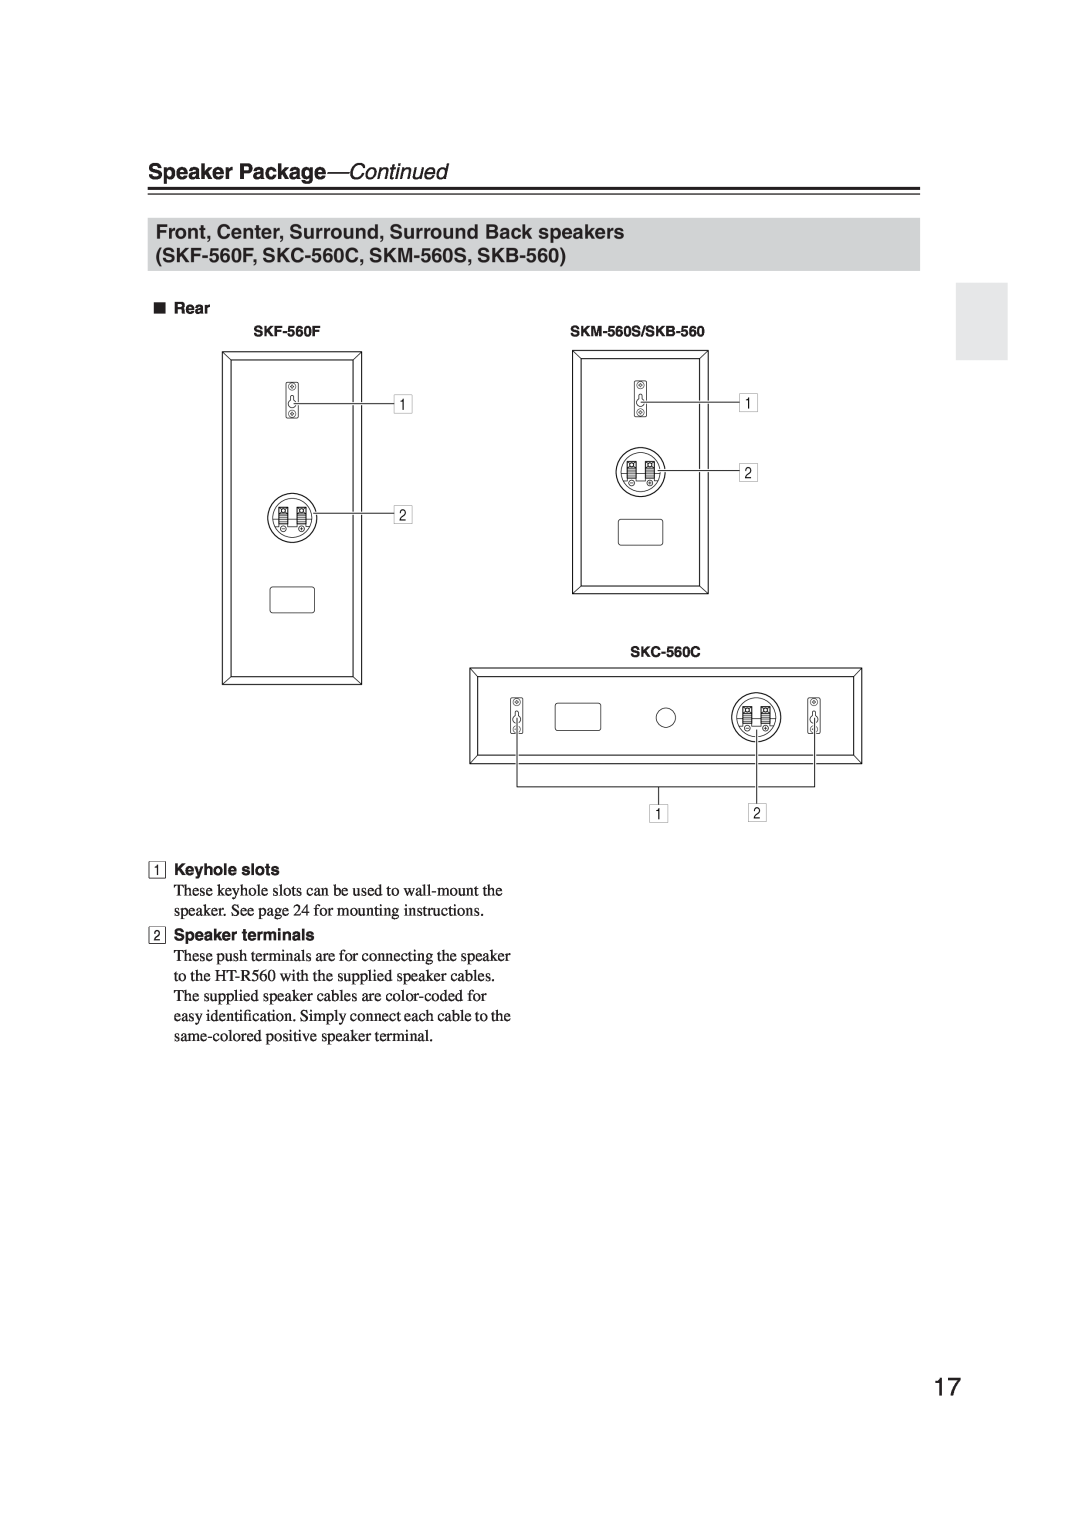 Onkyo S5100 instruction manual Speaker Package-Continued, Rear, 1Keyhole slots, 2Speaker terminals 